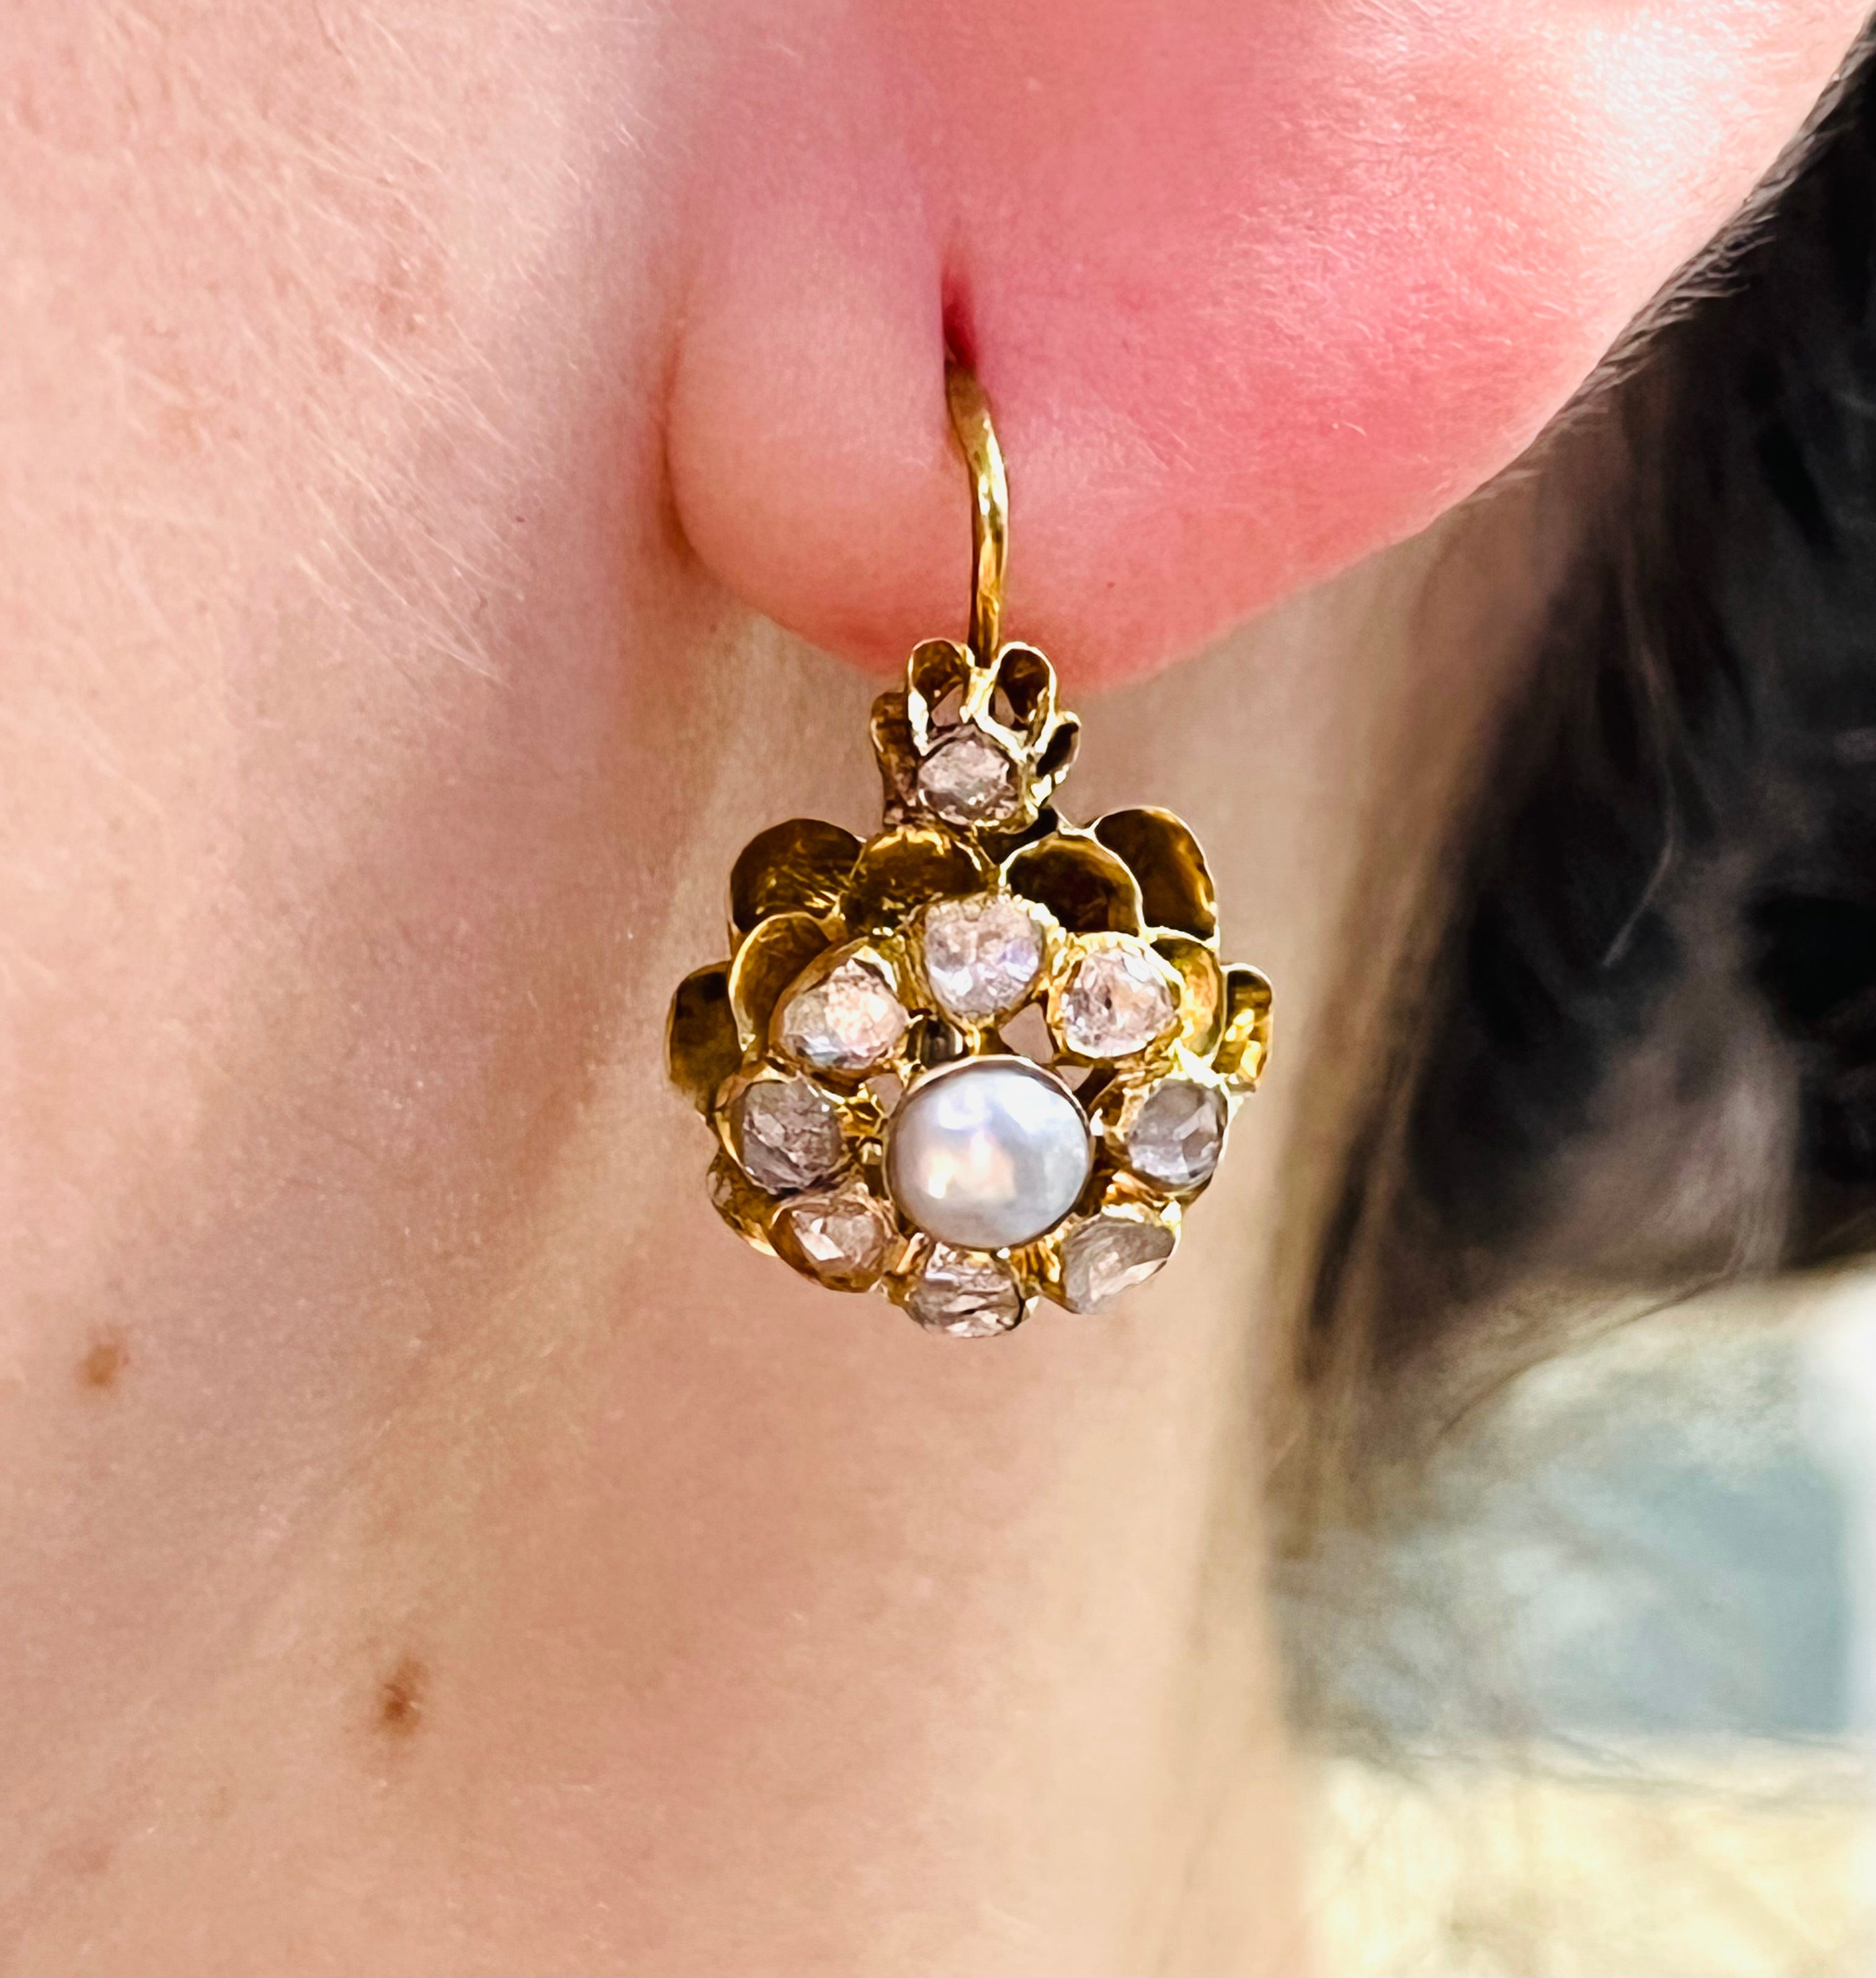 Antique Flower Rose Cut Diamonds and Pearl Solid 18K Yellow Gold Earrings